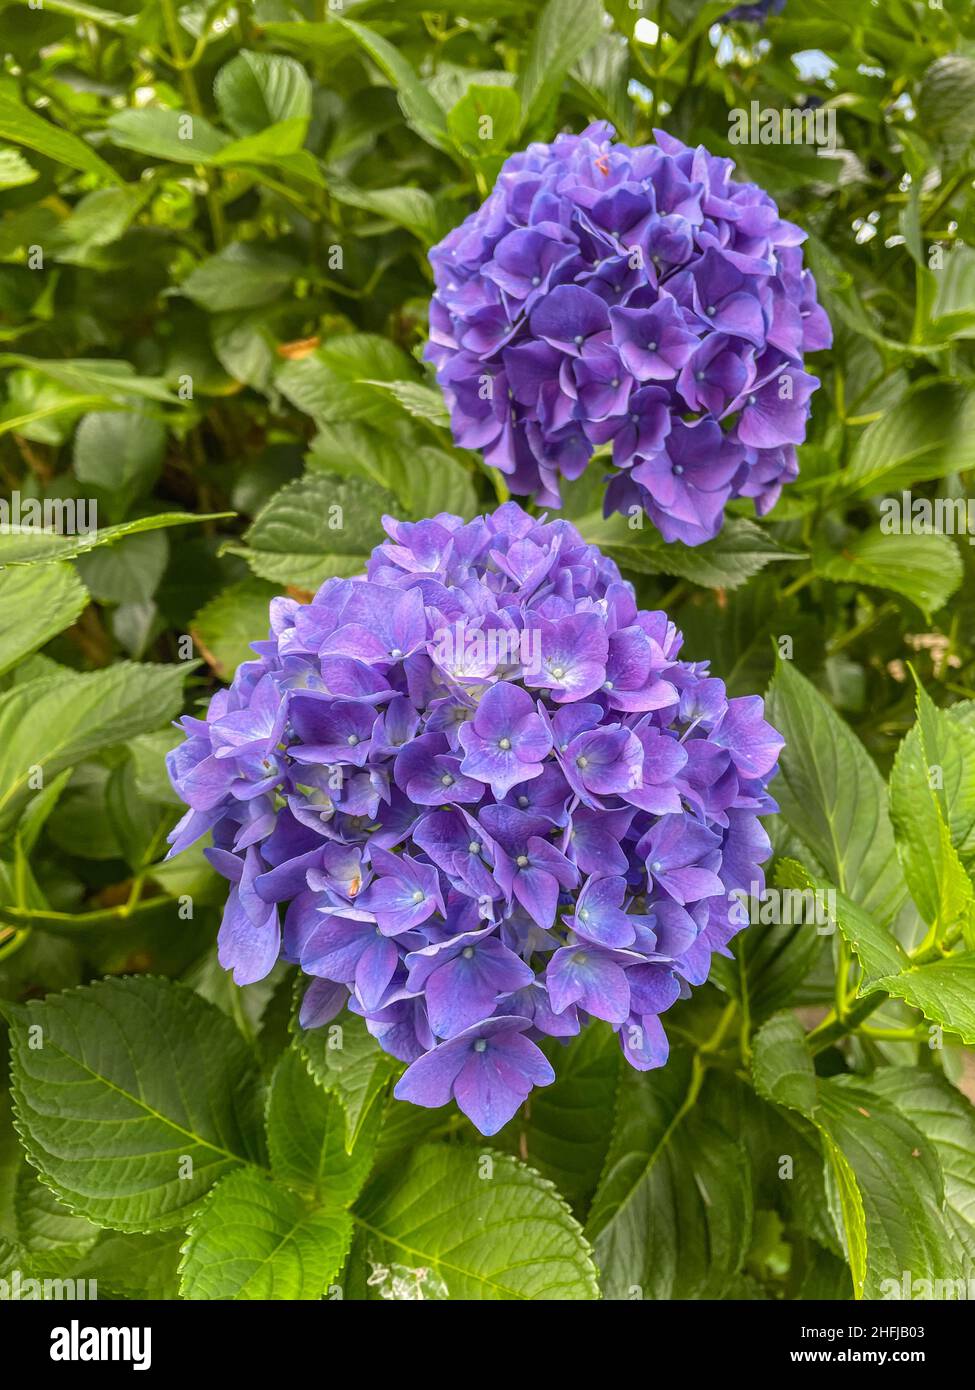 Bigleaf hydrangea (Hydrangea macrophylla) is a species of flowering plant in the family Hydrangeaceae, native to China and Japan. Stock Photo